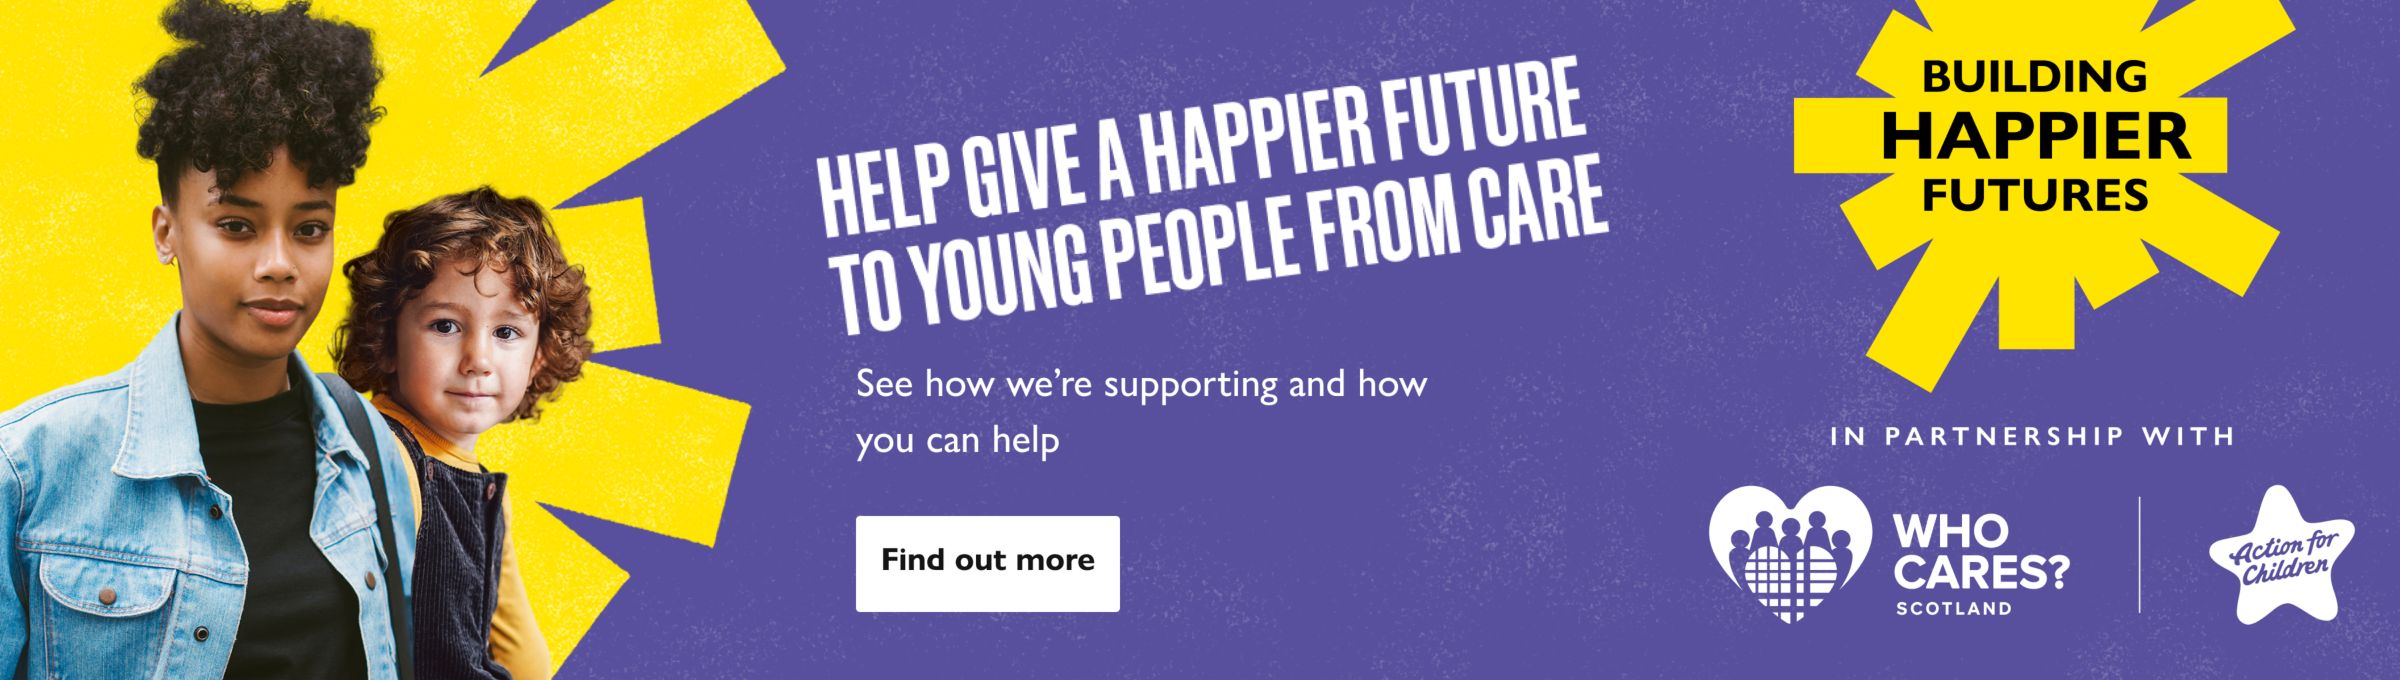 Building Happier Futures, See how we’re supporting and how you can help